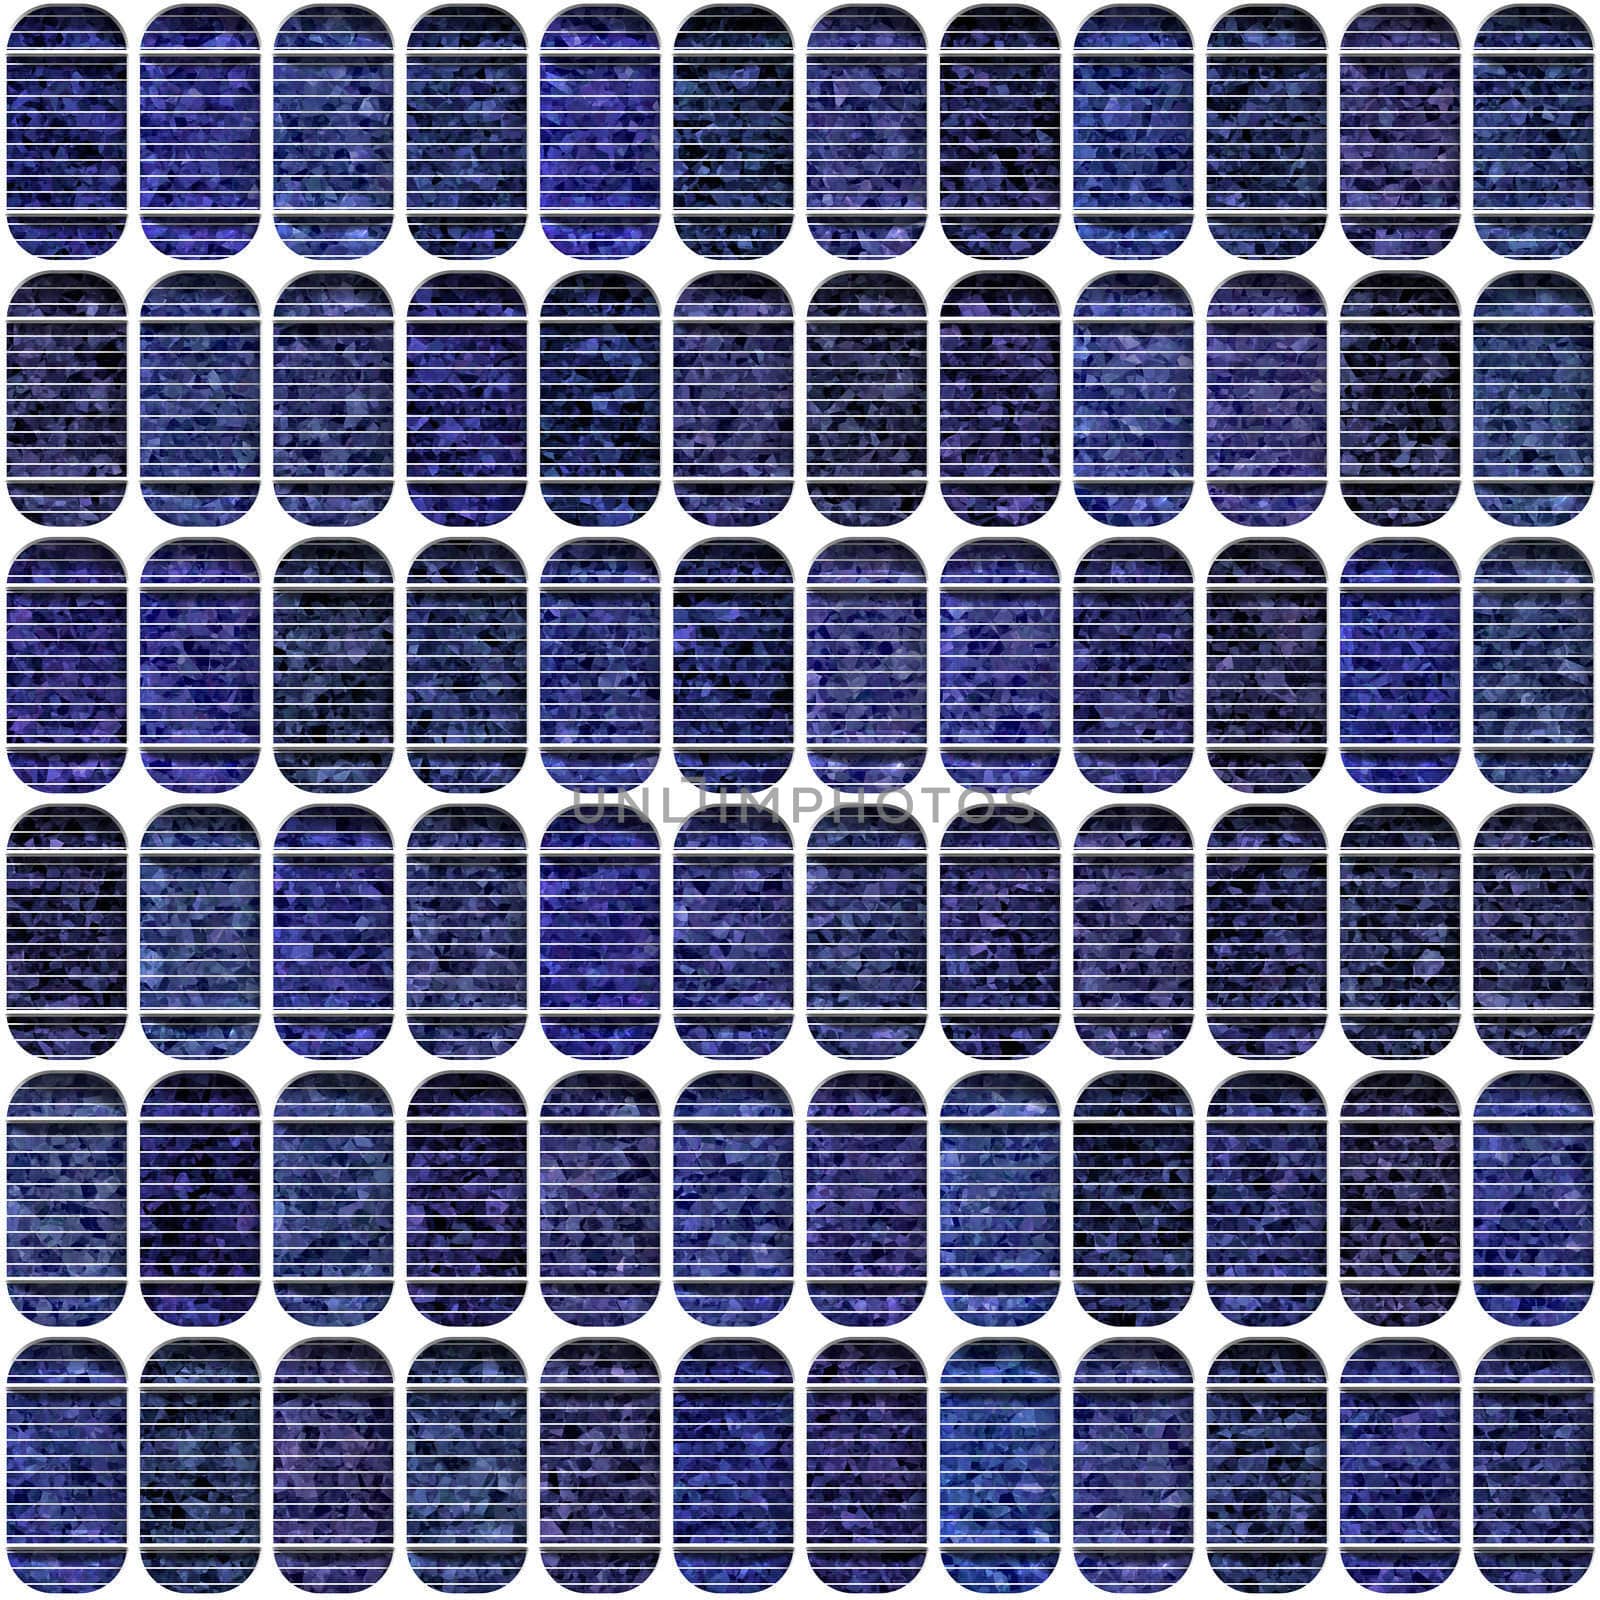 great image of blue solar cells in a panel